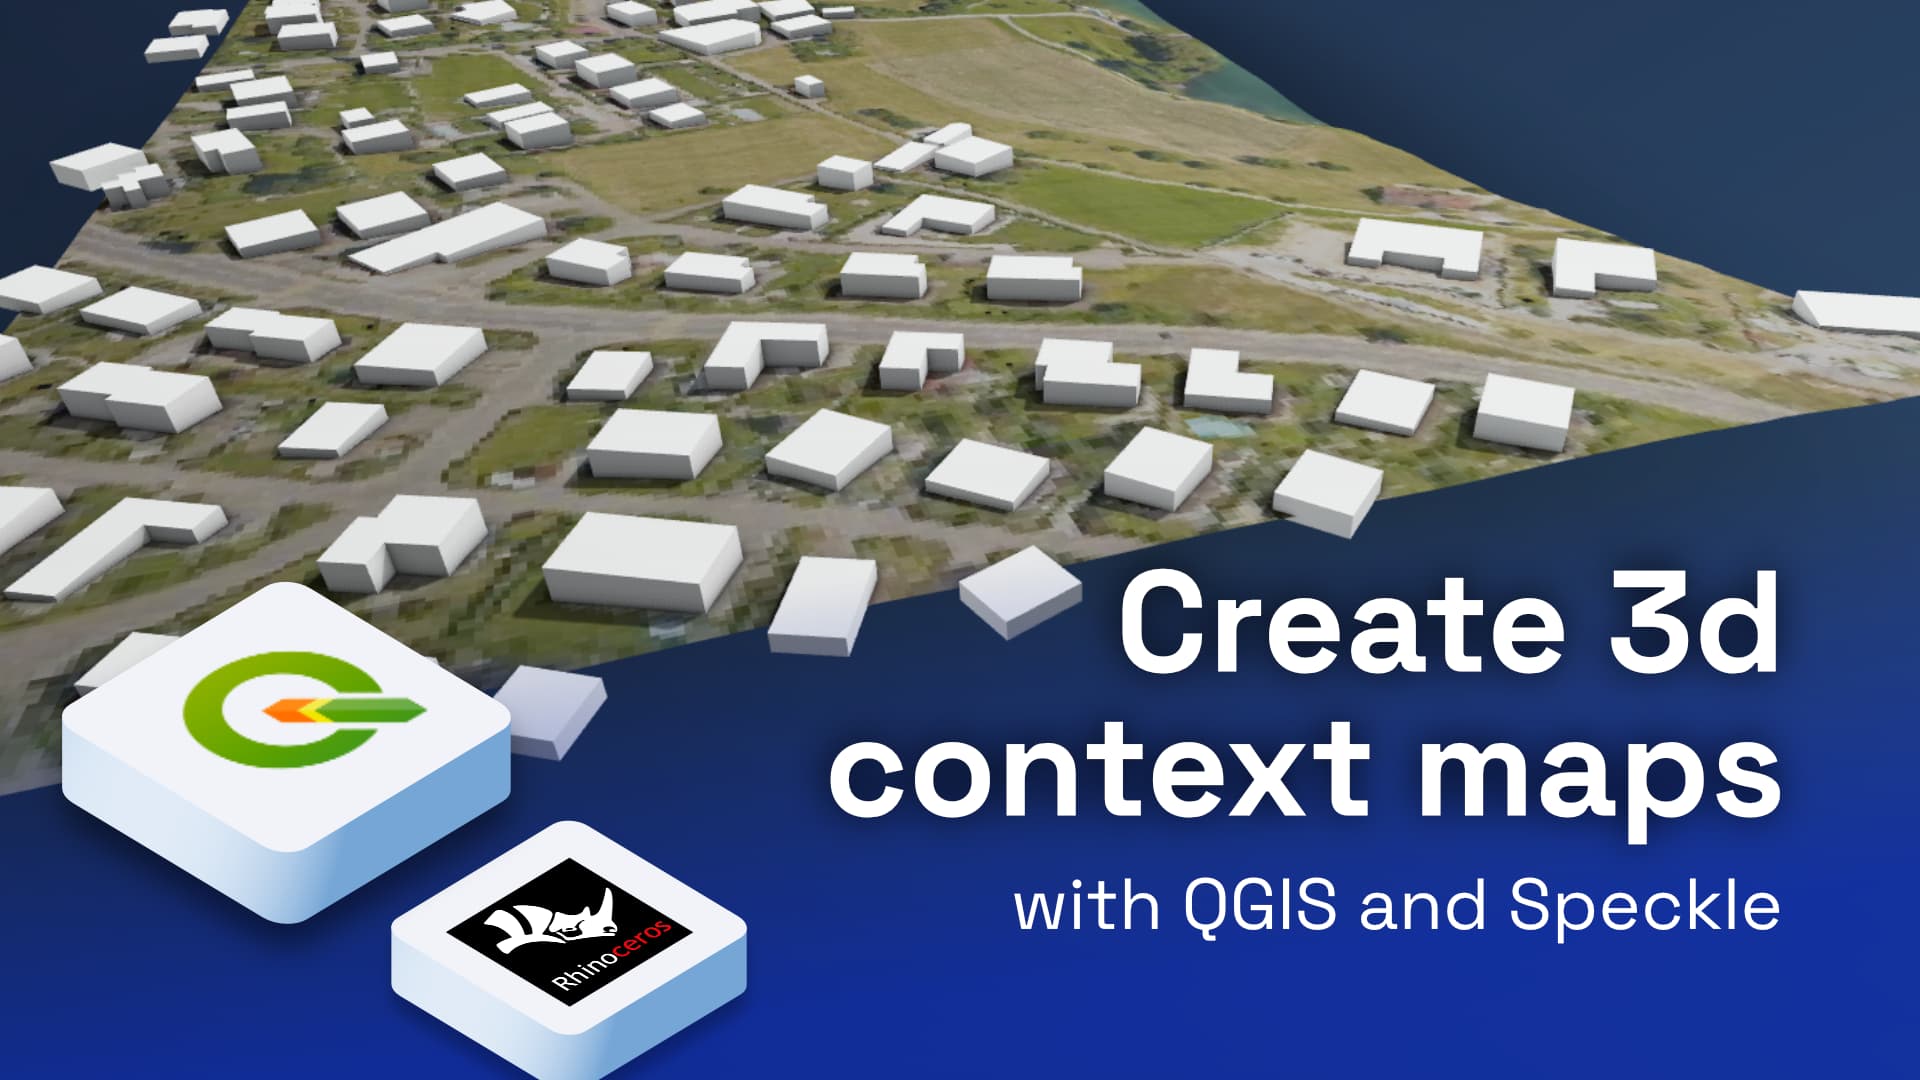 Create 3D Context Maps with QGIS and Speckle